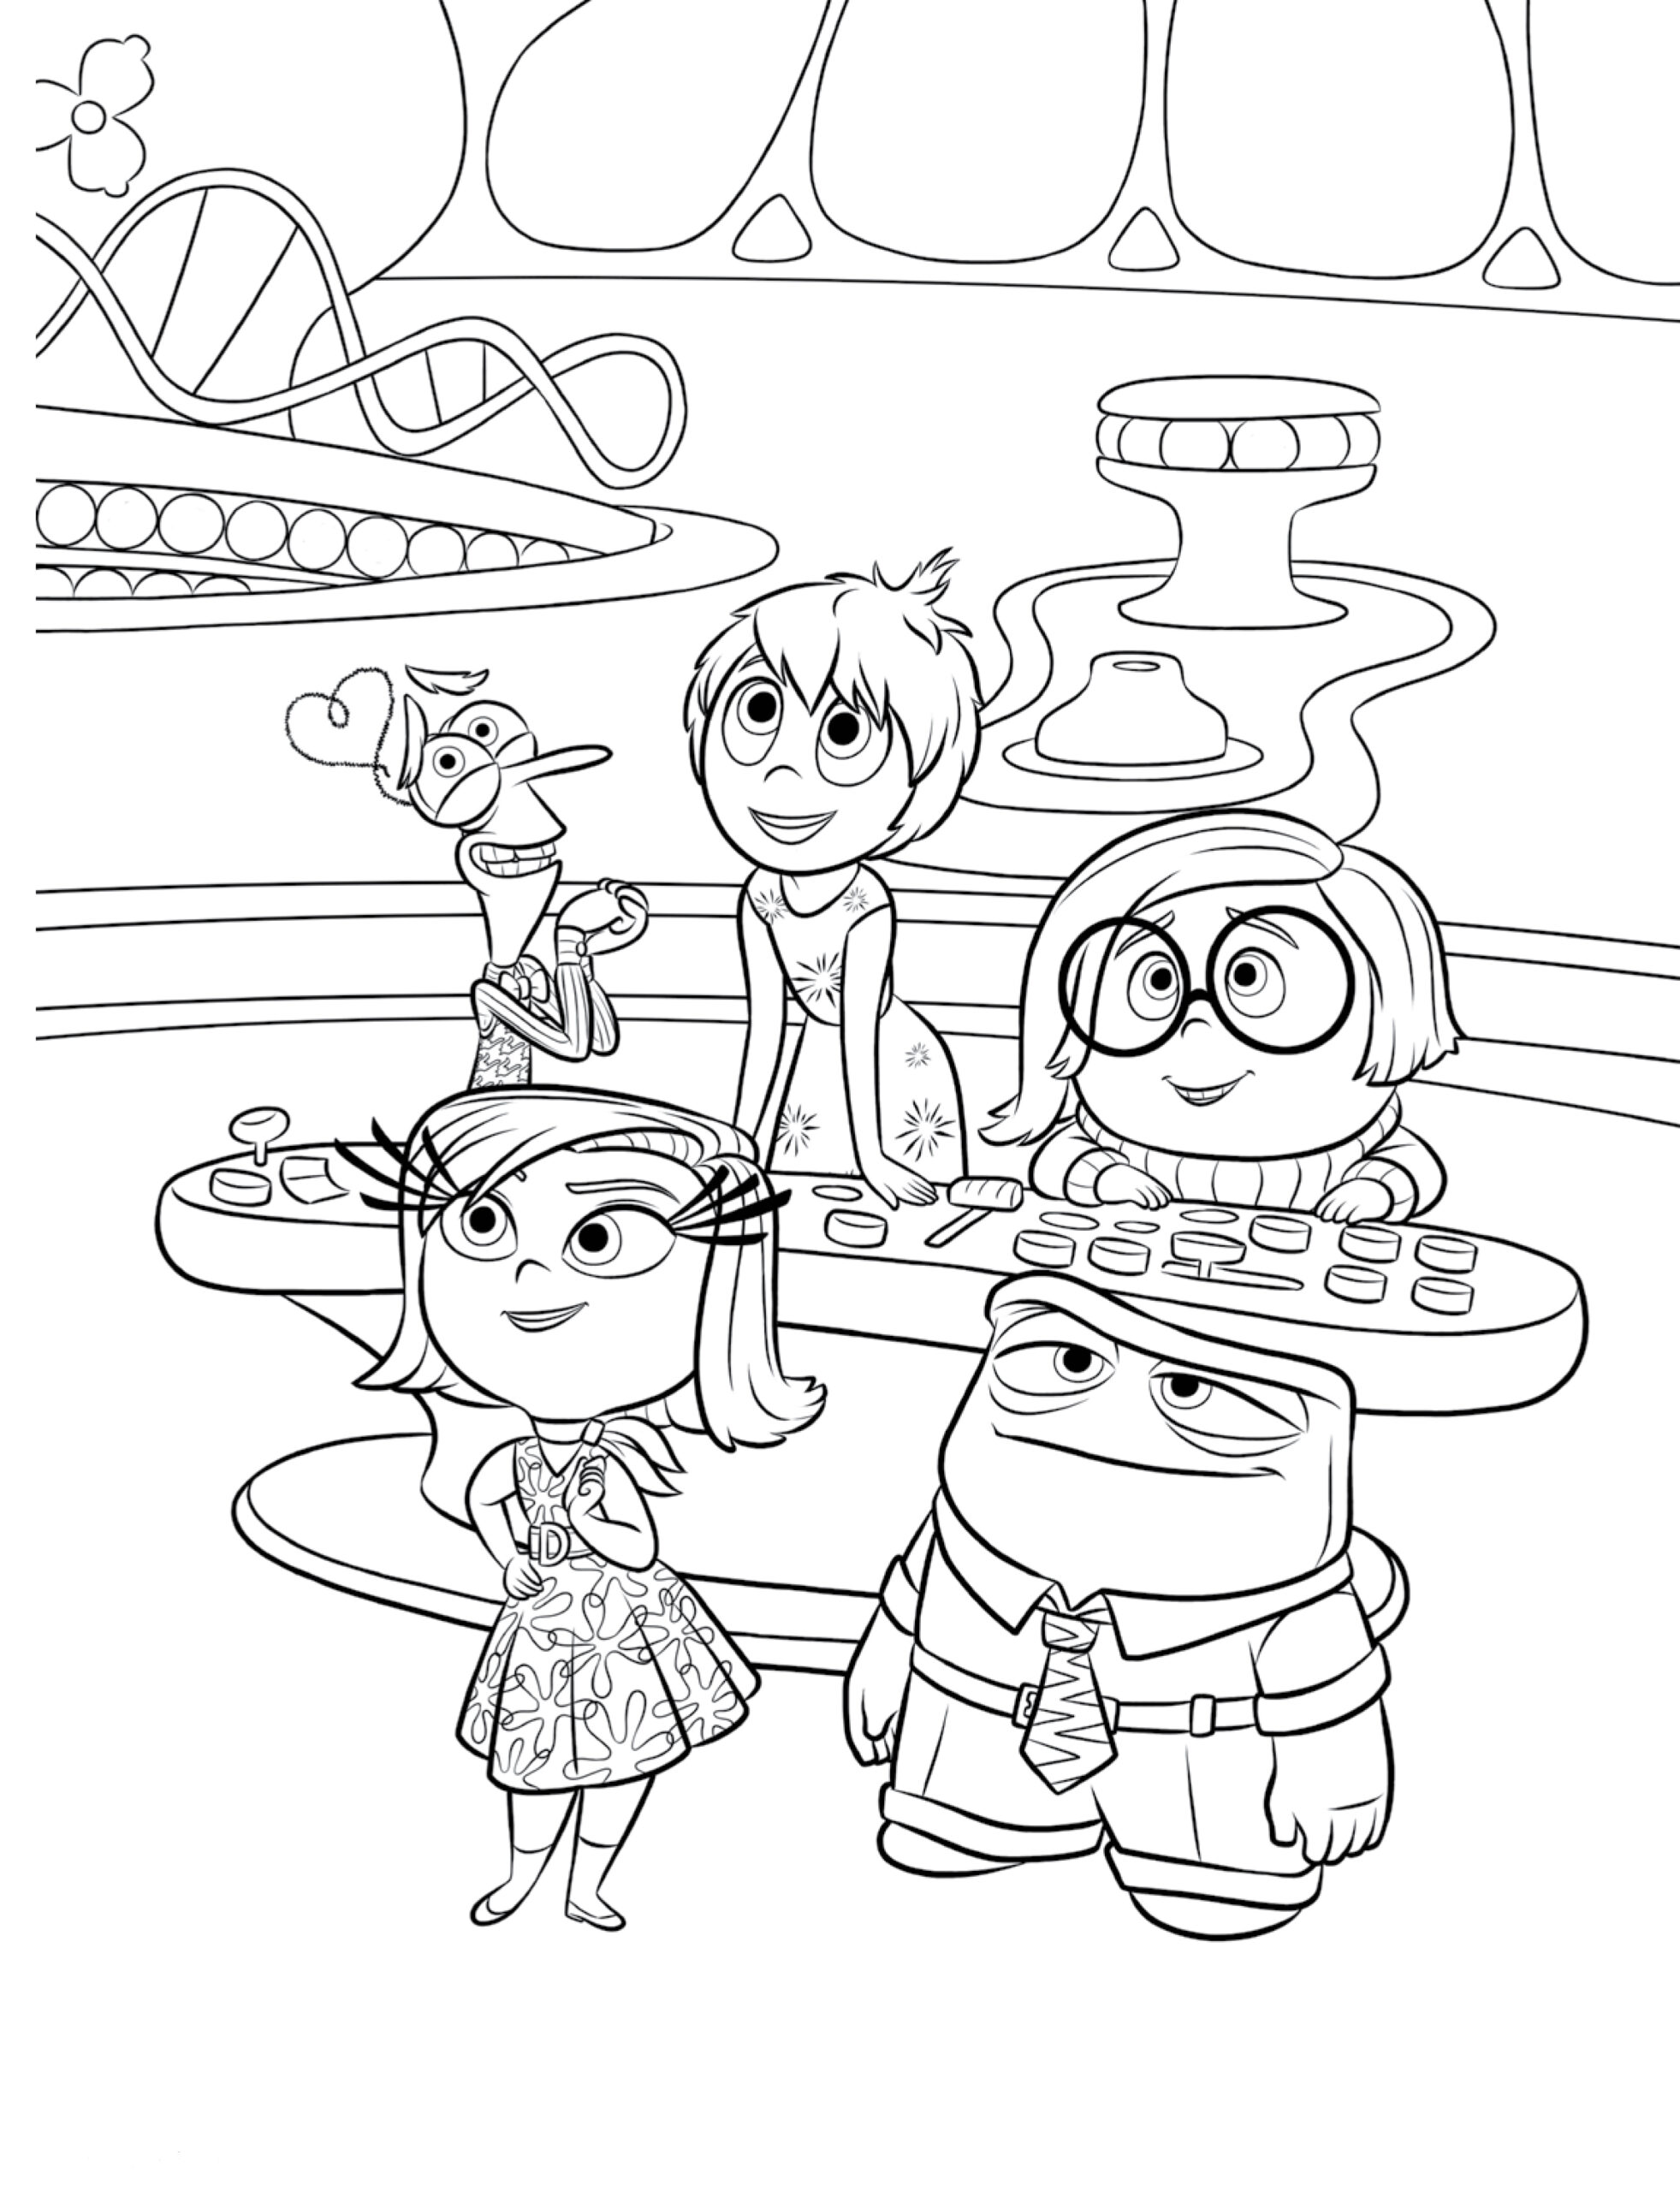 inside out coloring pages